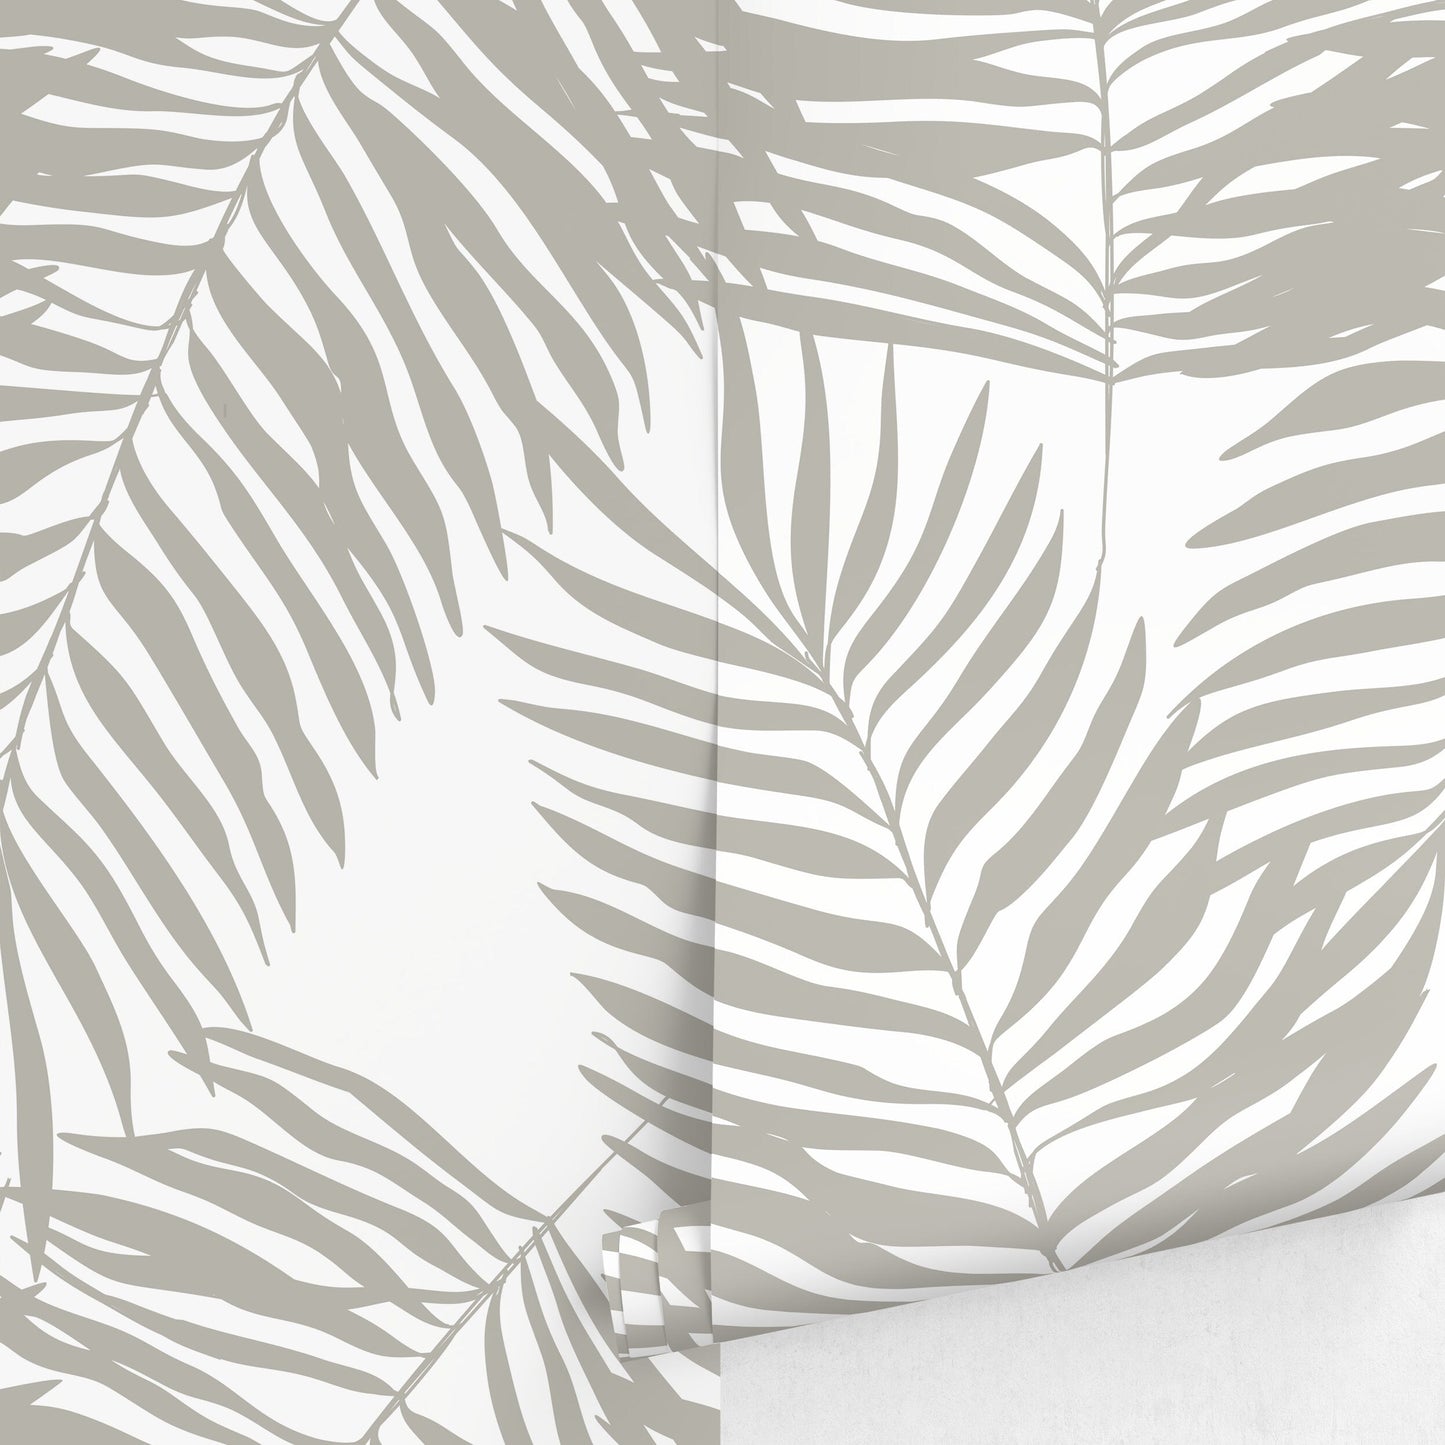 Wallpaper Peel and Stick Wallpaper Removable Wallpaper Home Decor Wall Art Wall Decor Room Decor / Gray Tropical Leaves Wallpaper - C364